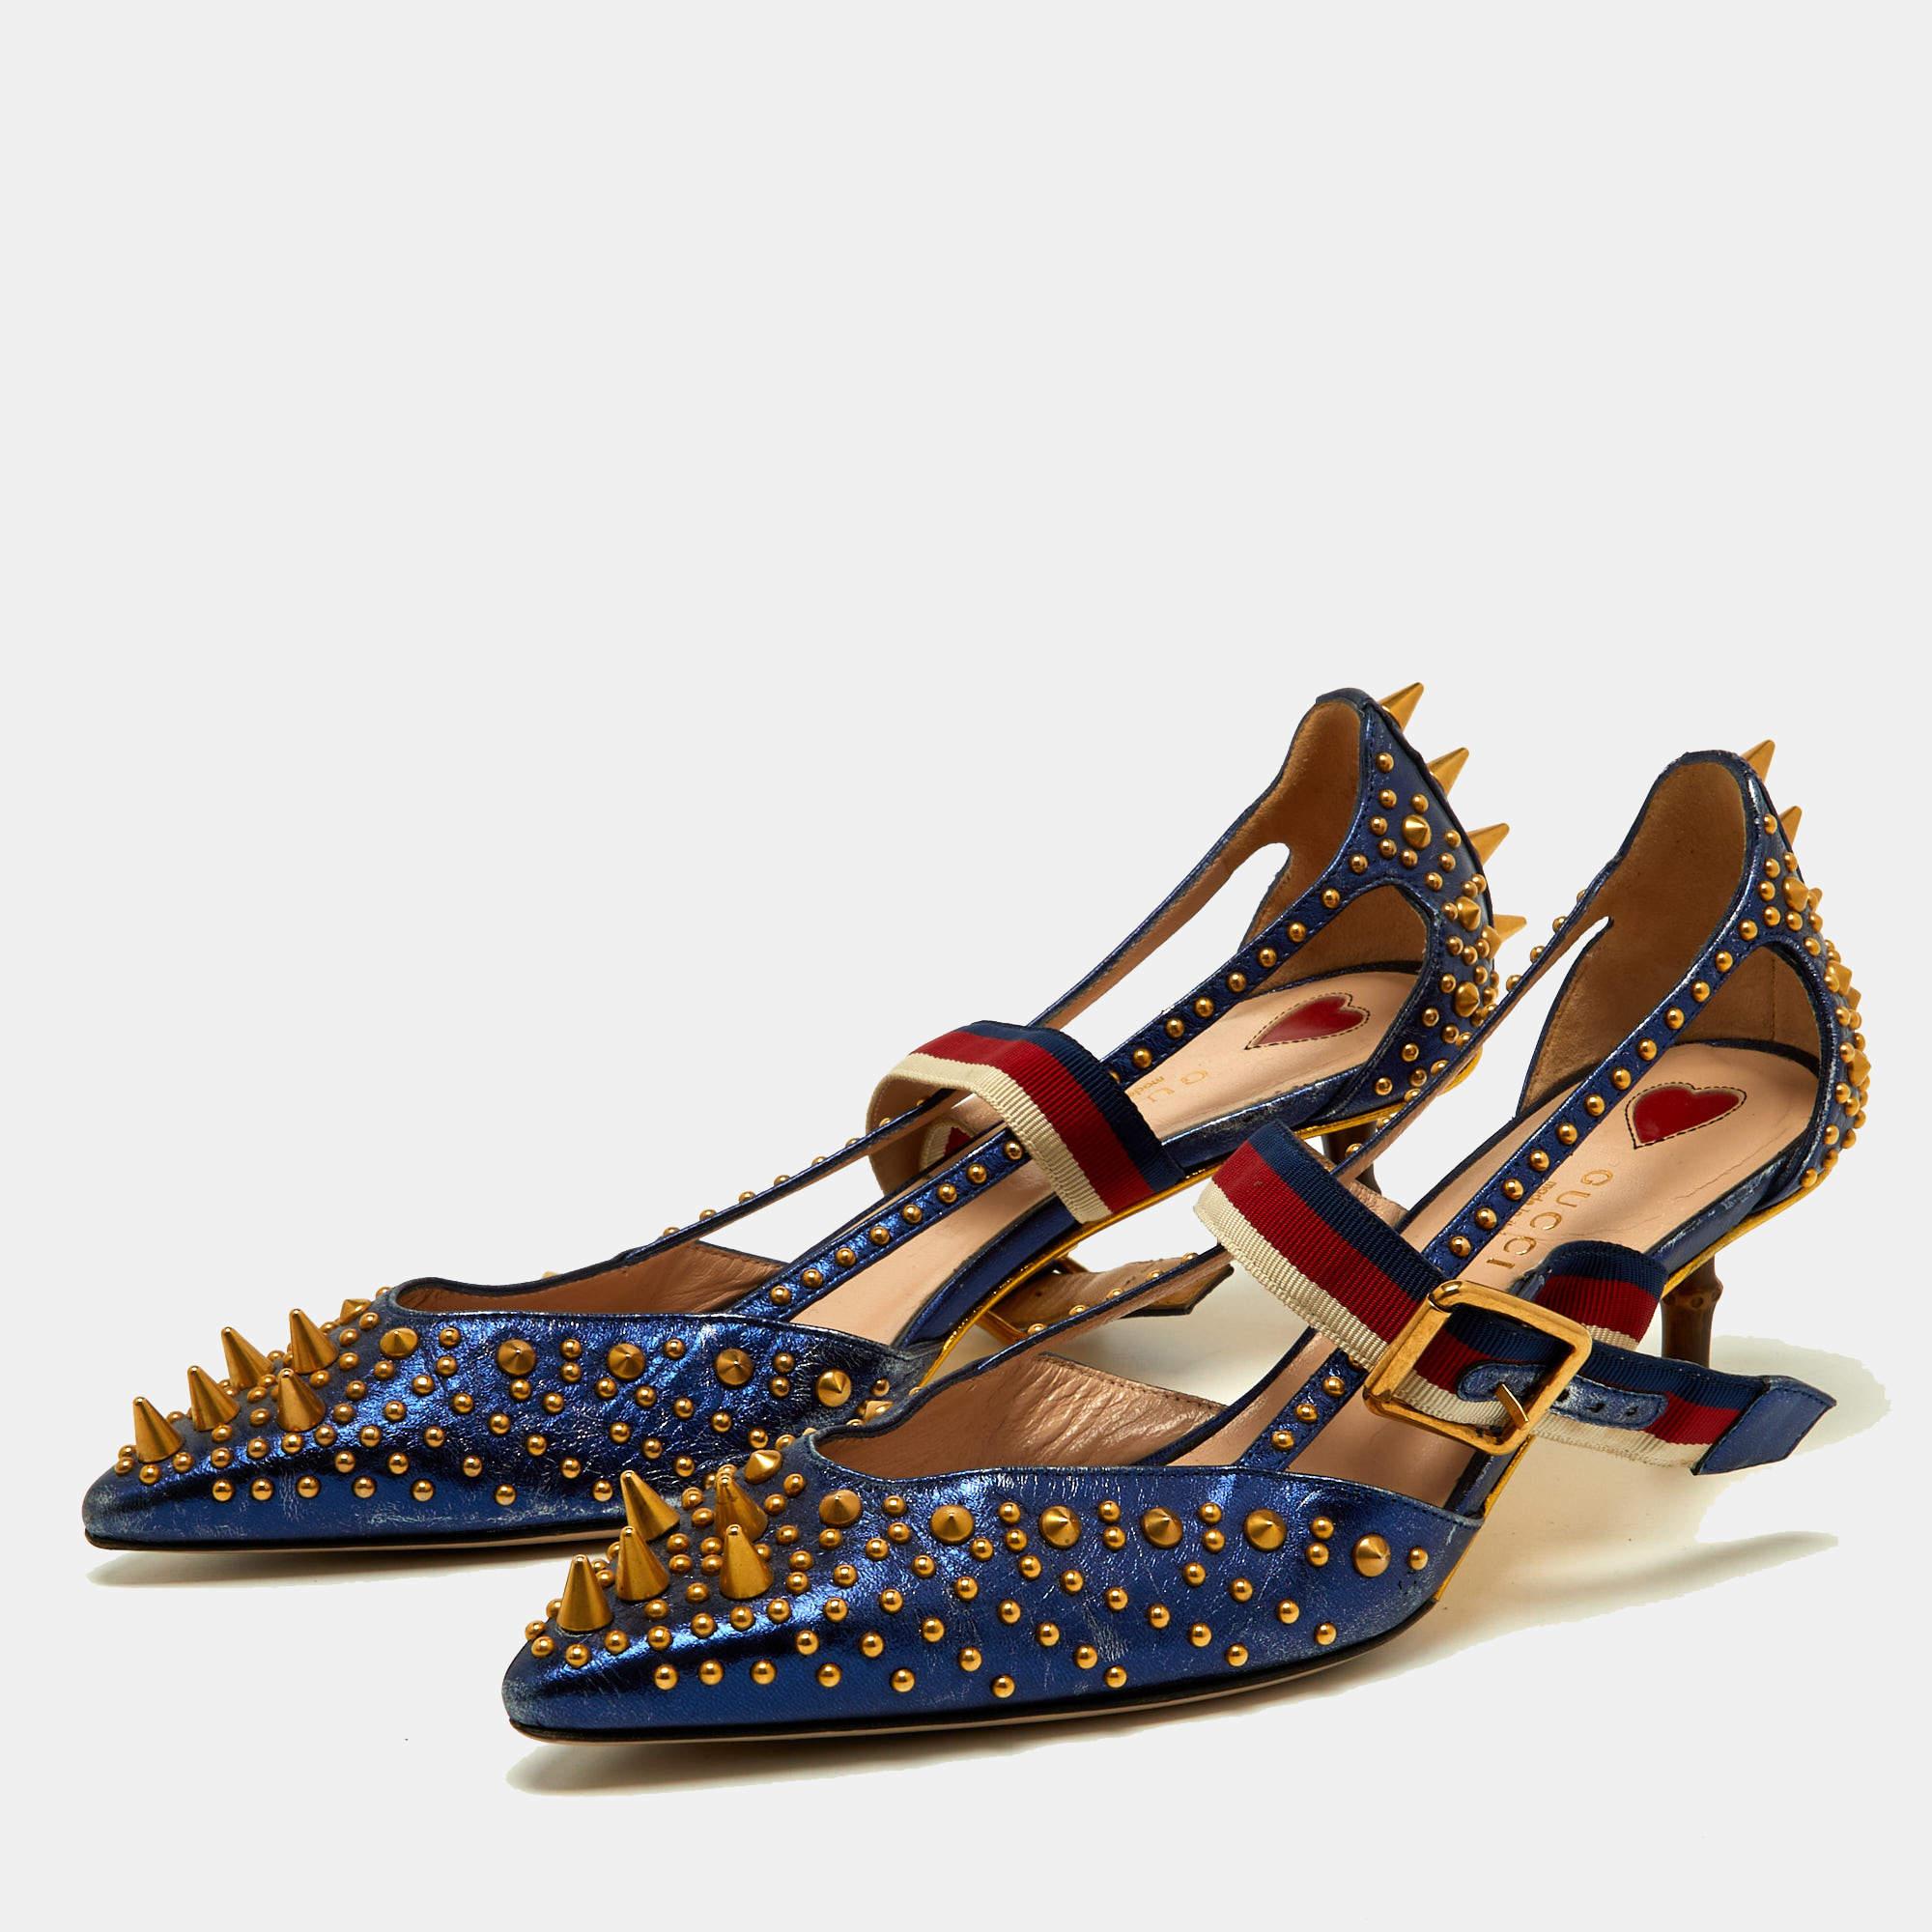 These pointed-toe Unia pumps from Gucci have come straight from a shoe lover's dream. Crafted from blue leather, detailed with gold-tone studs all over along with signature Web straps on the ankle and are balanced on 5.5cm heels. The pumps are